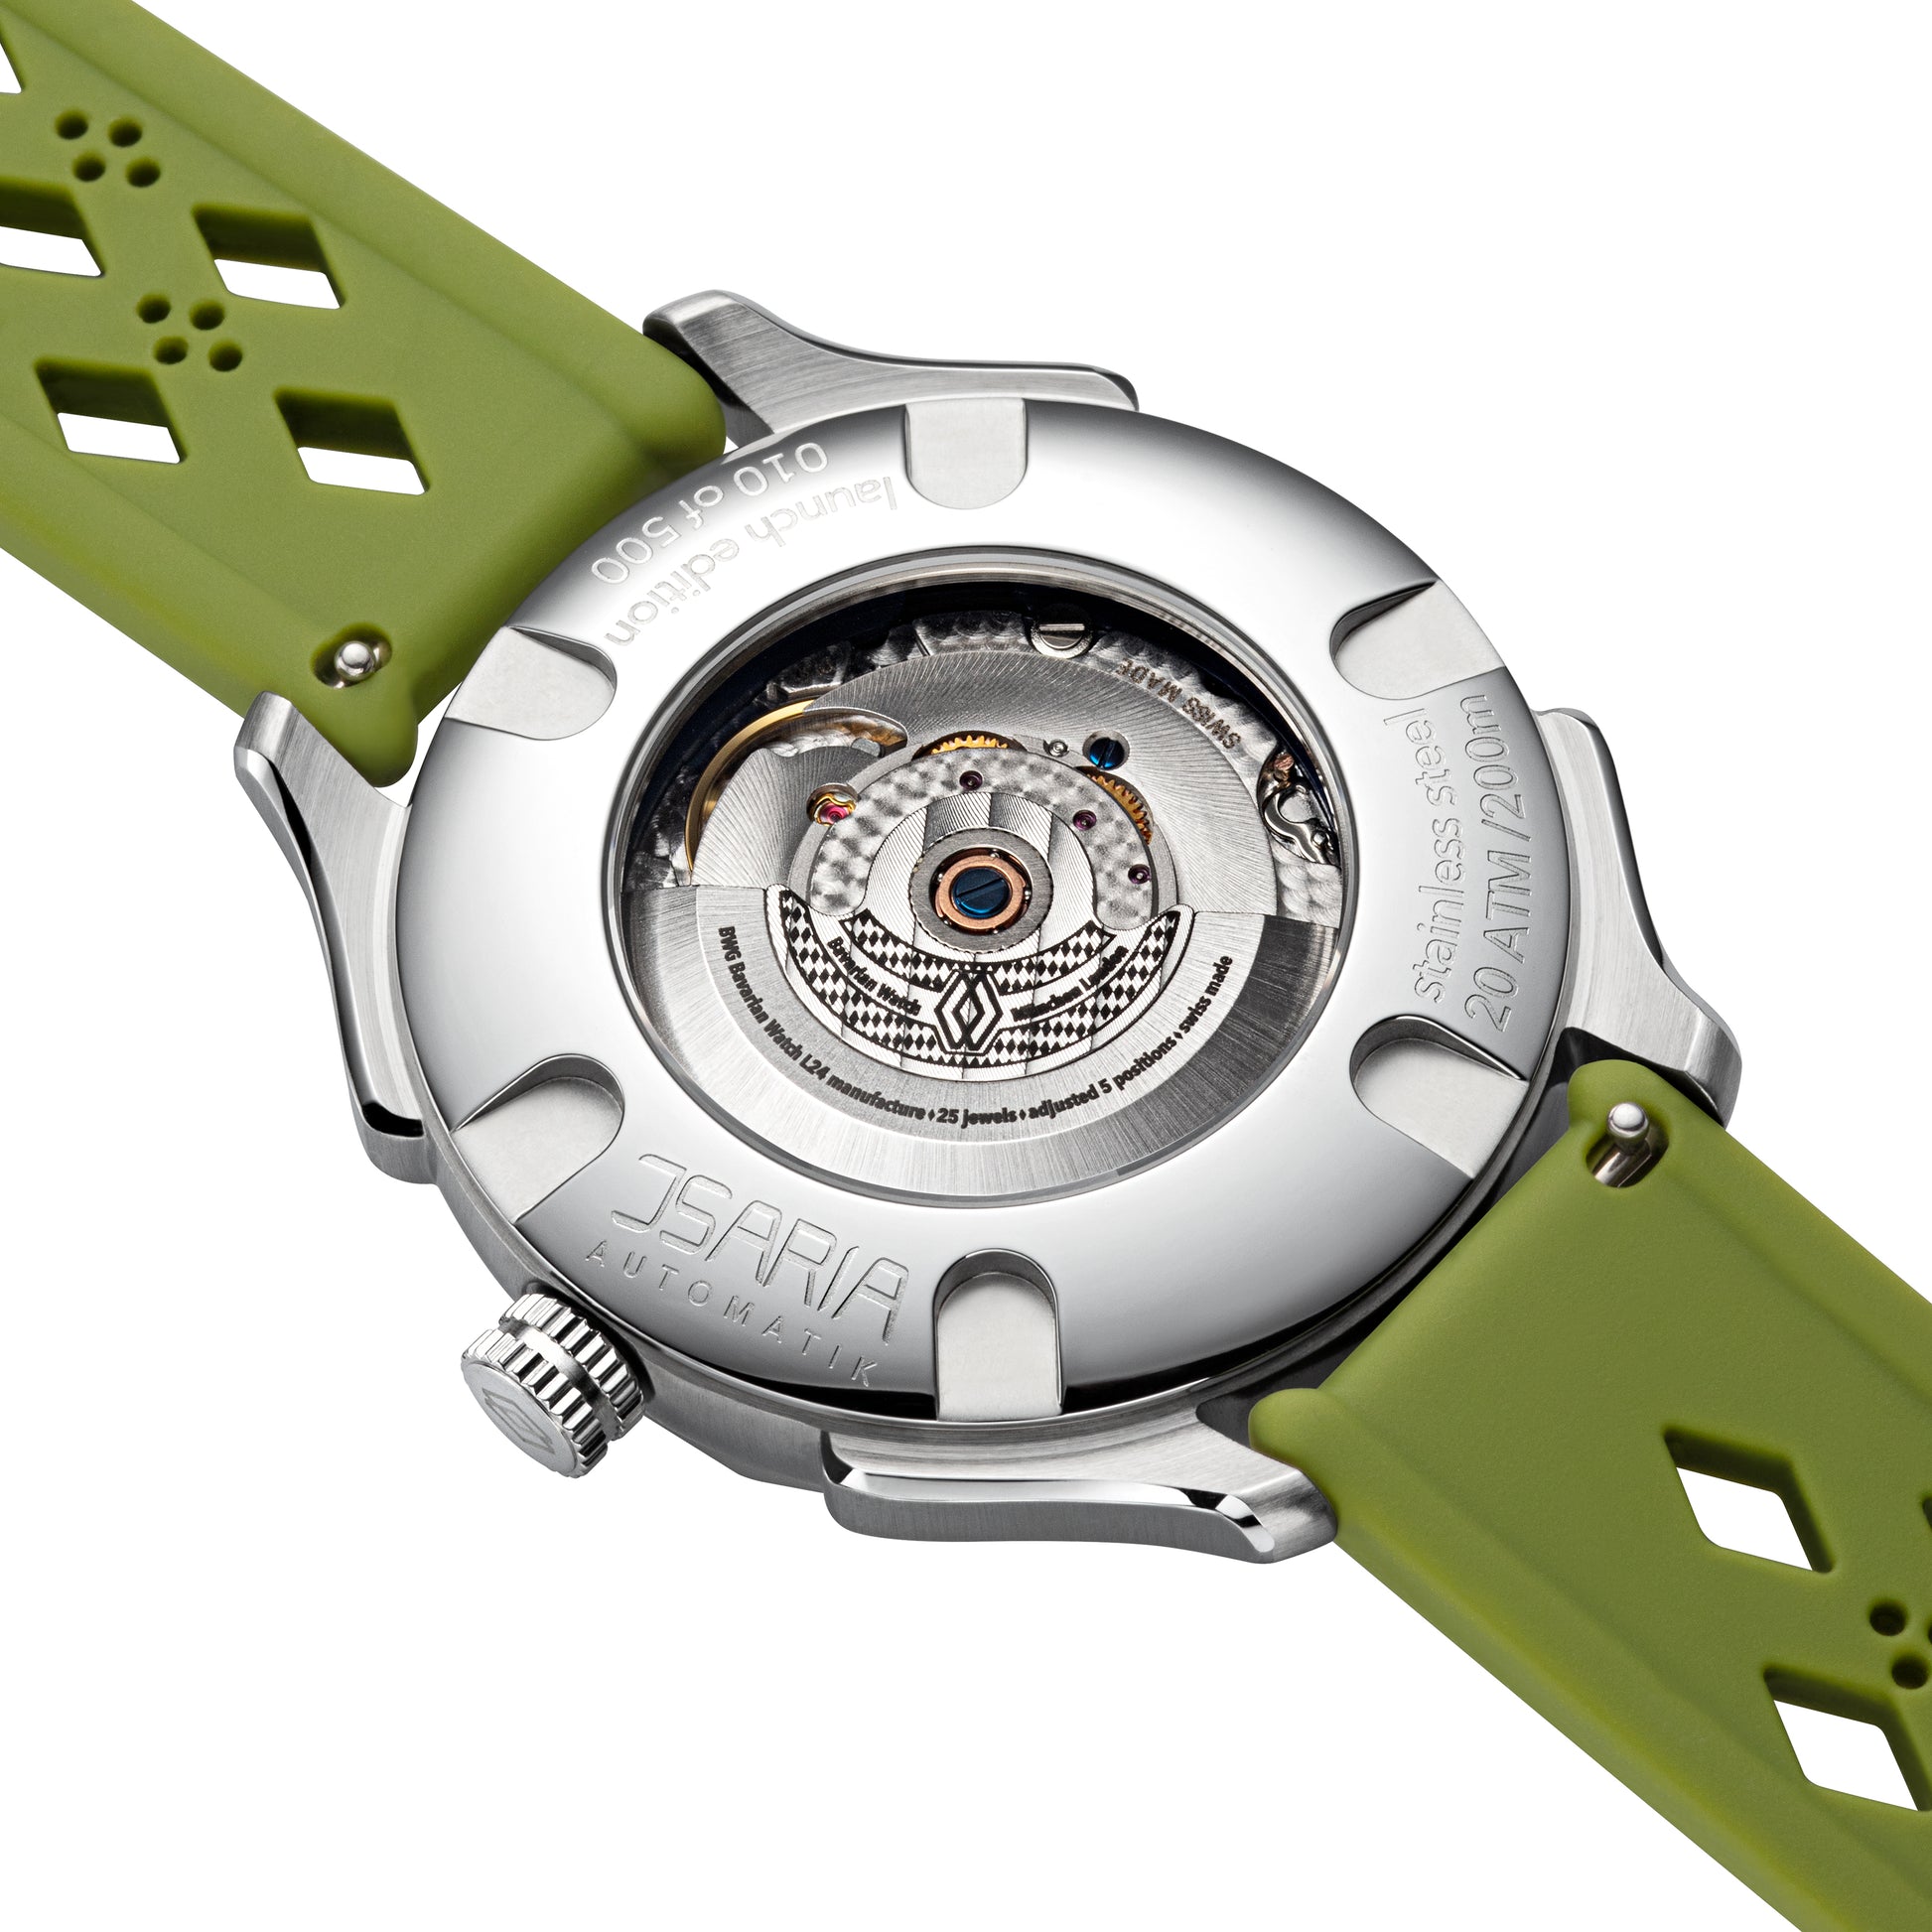 BWG-ISARIA-Automatic-watch-Swiss-Movement-Landeron-L24-manufacture-isar-green-back-movement-view